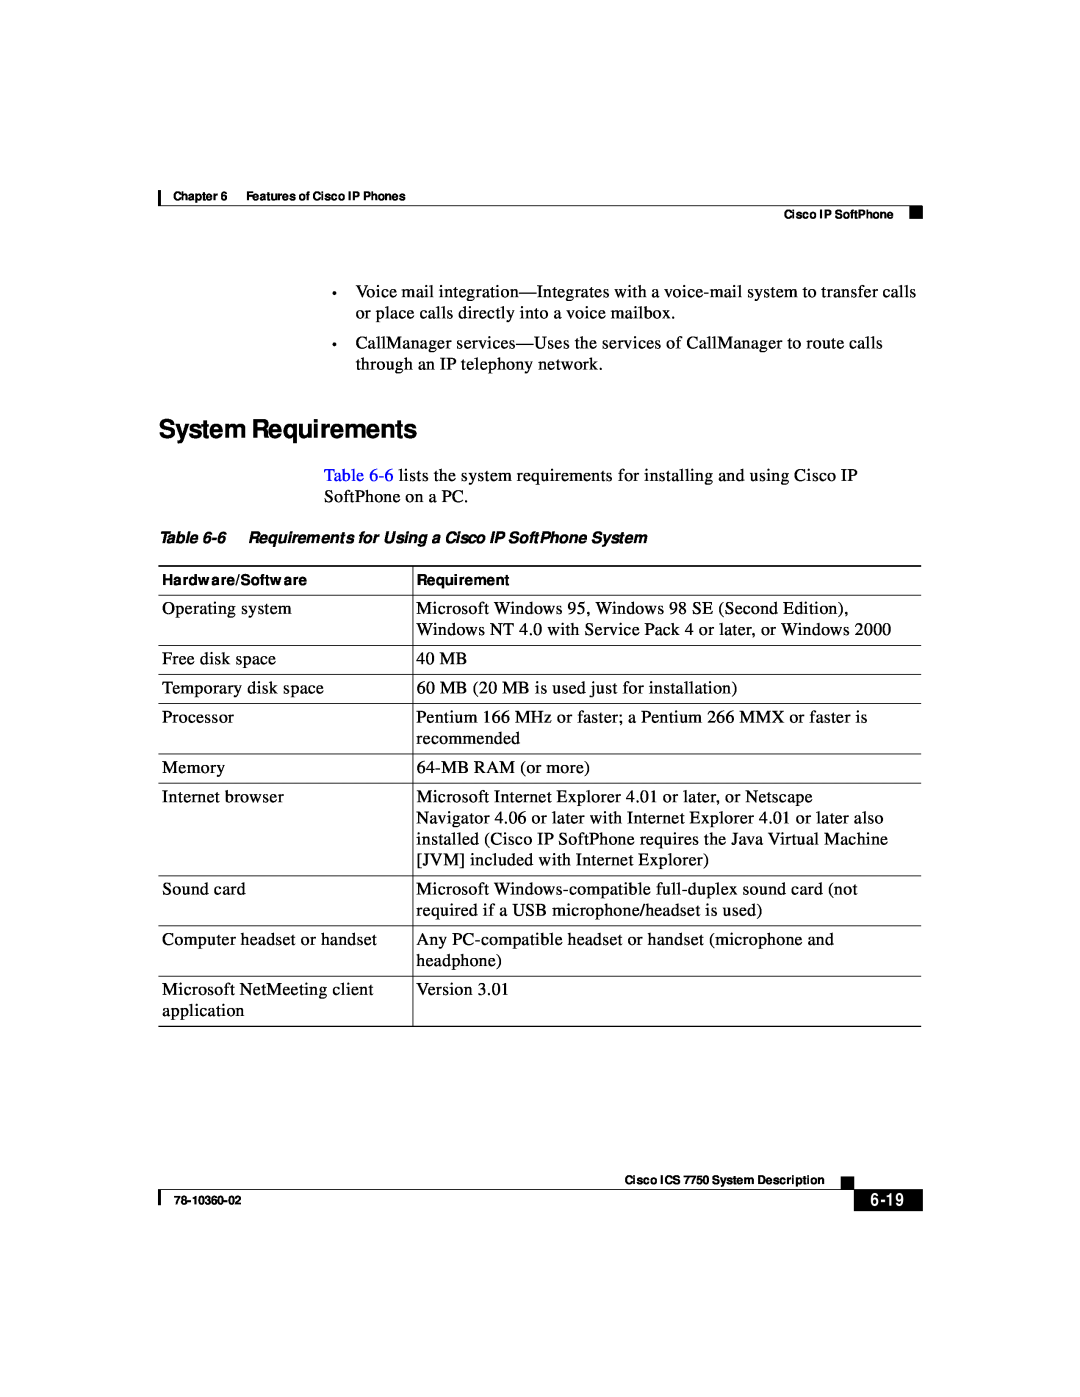 Cisco Systems ICS-7750 manual System Requirements, Hardware/Software, 6-19 